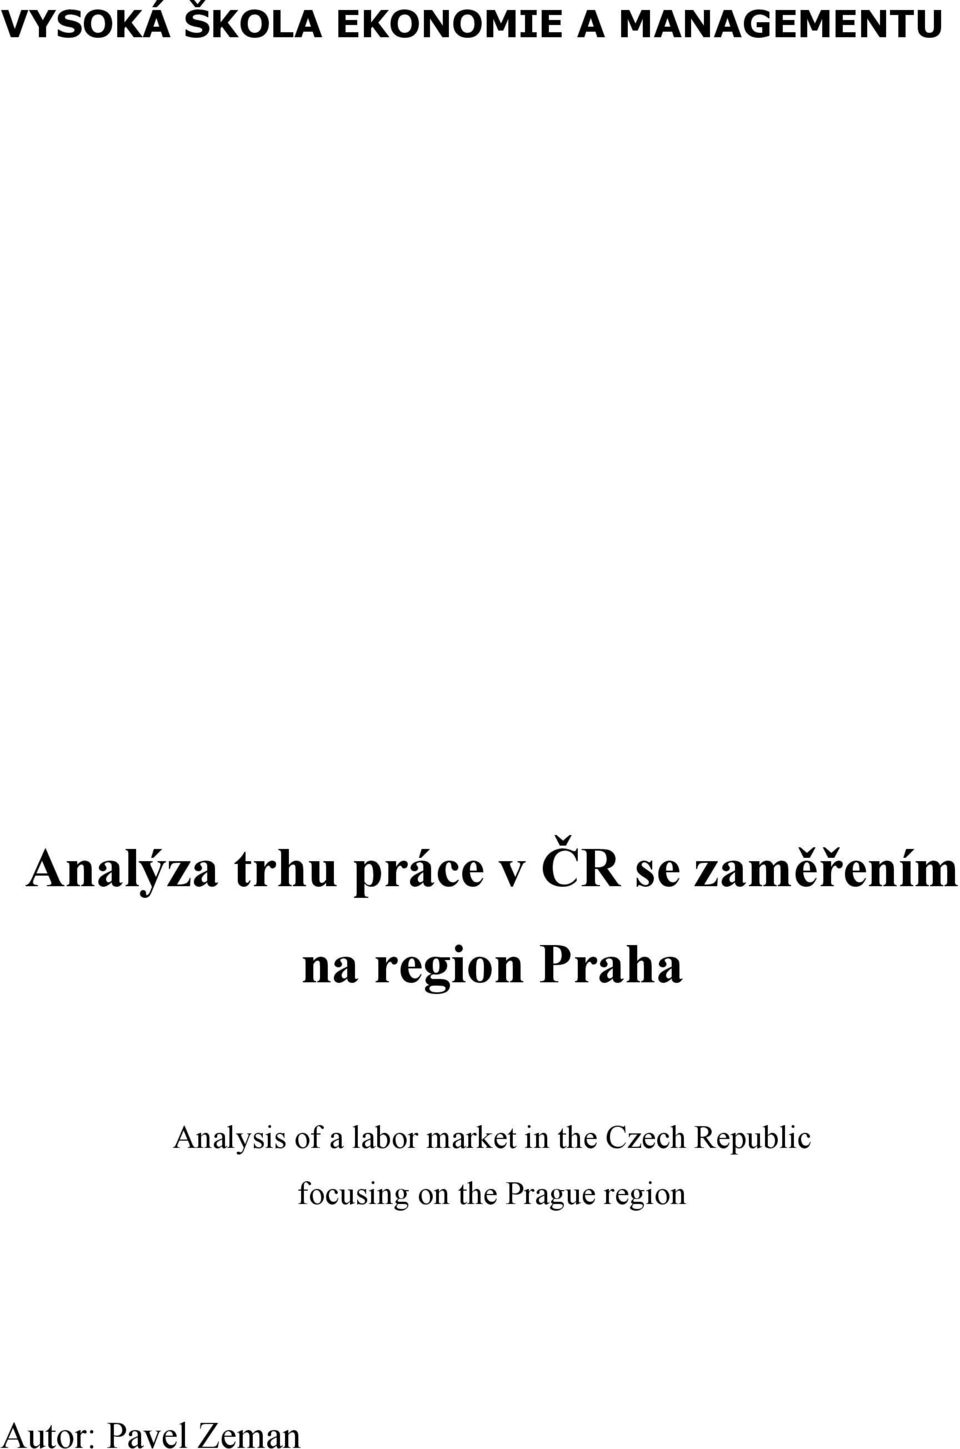 Analysis of a labor market in the Czech